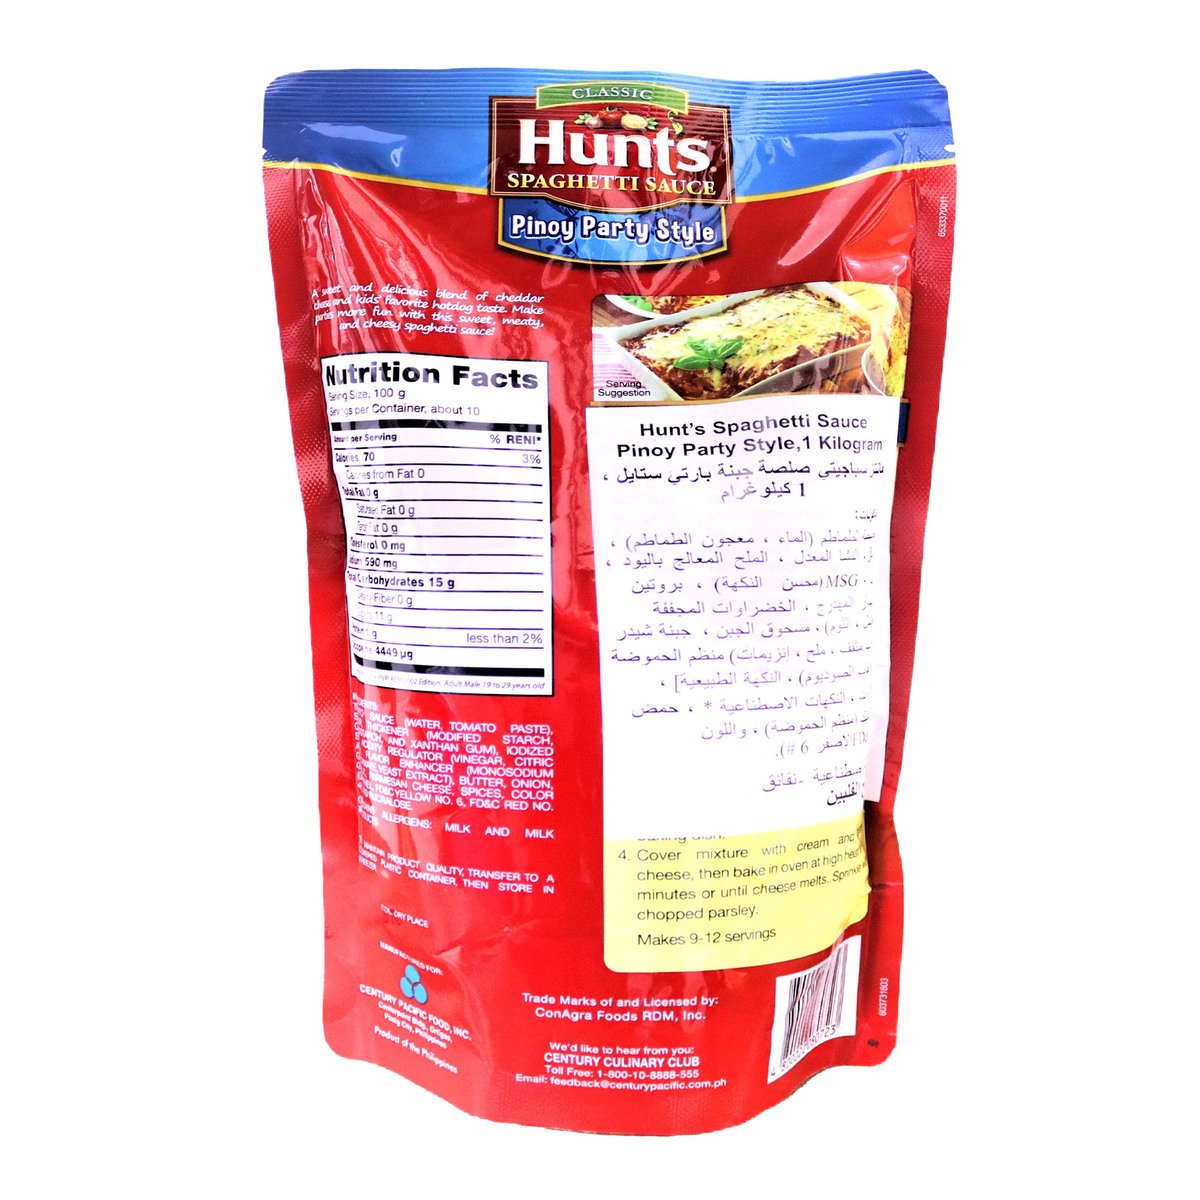 Hunts Pinoy Party Style Spaghetti Sauce 1 kg